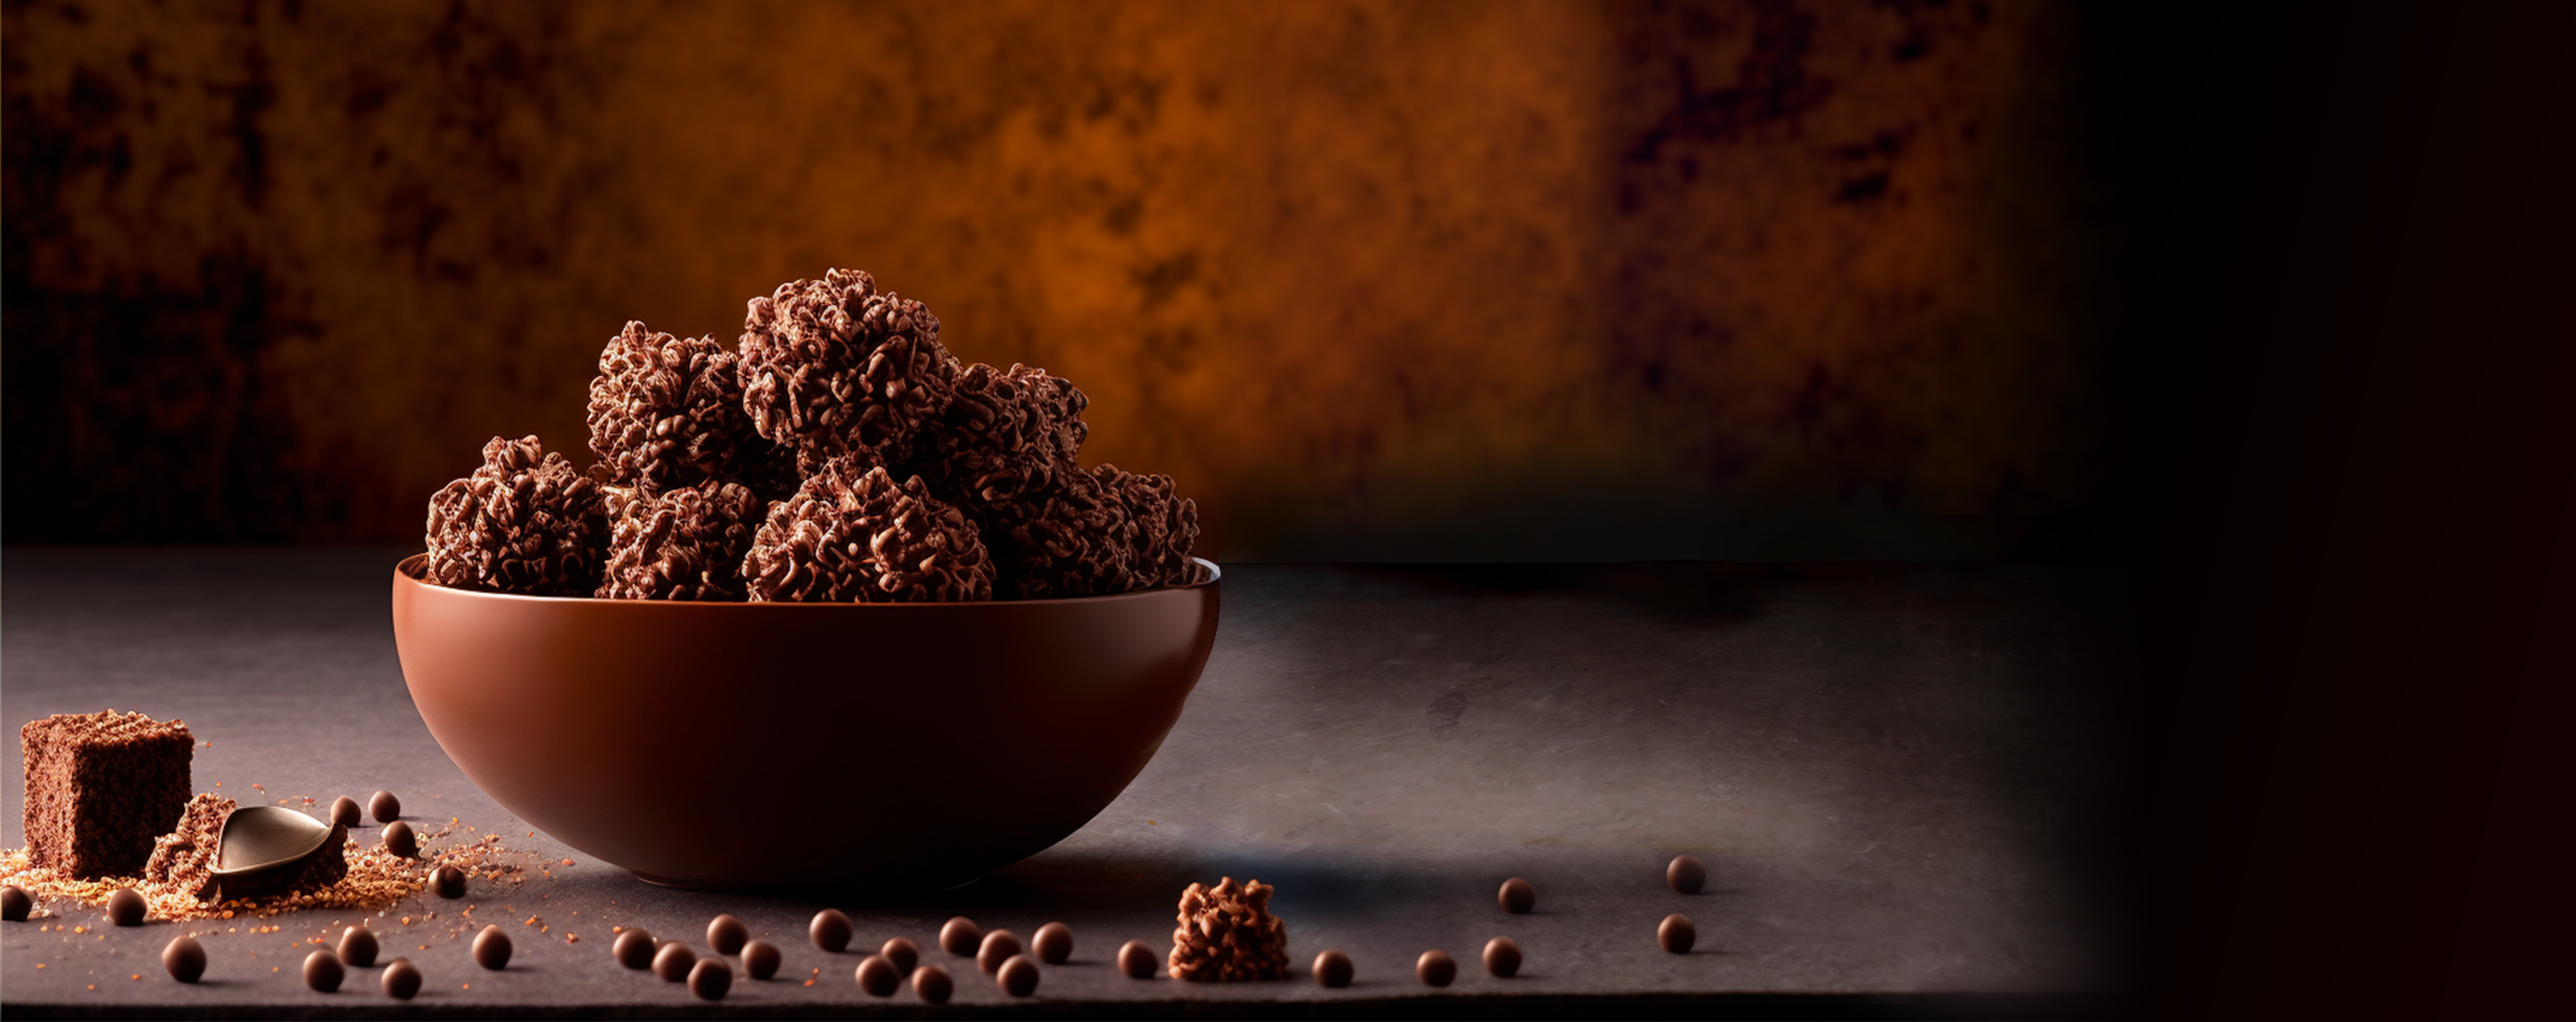 Delicious bowl of chocolate crackles